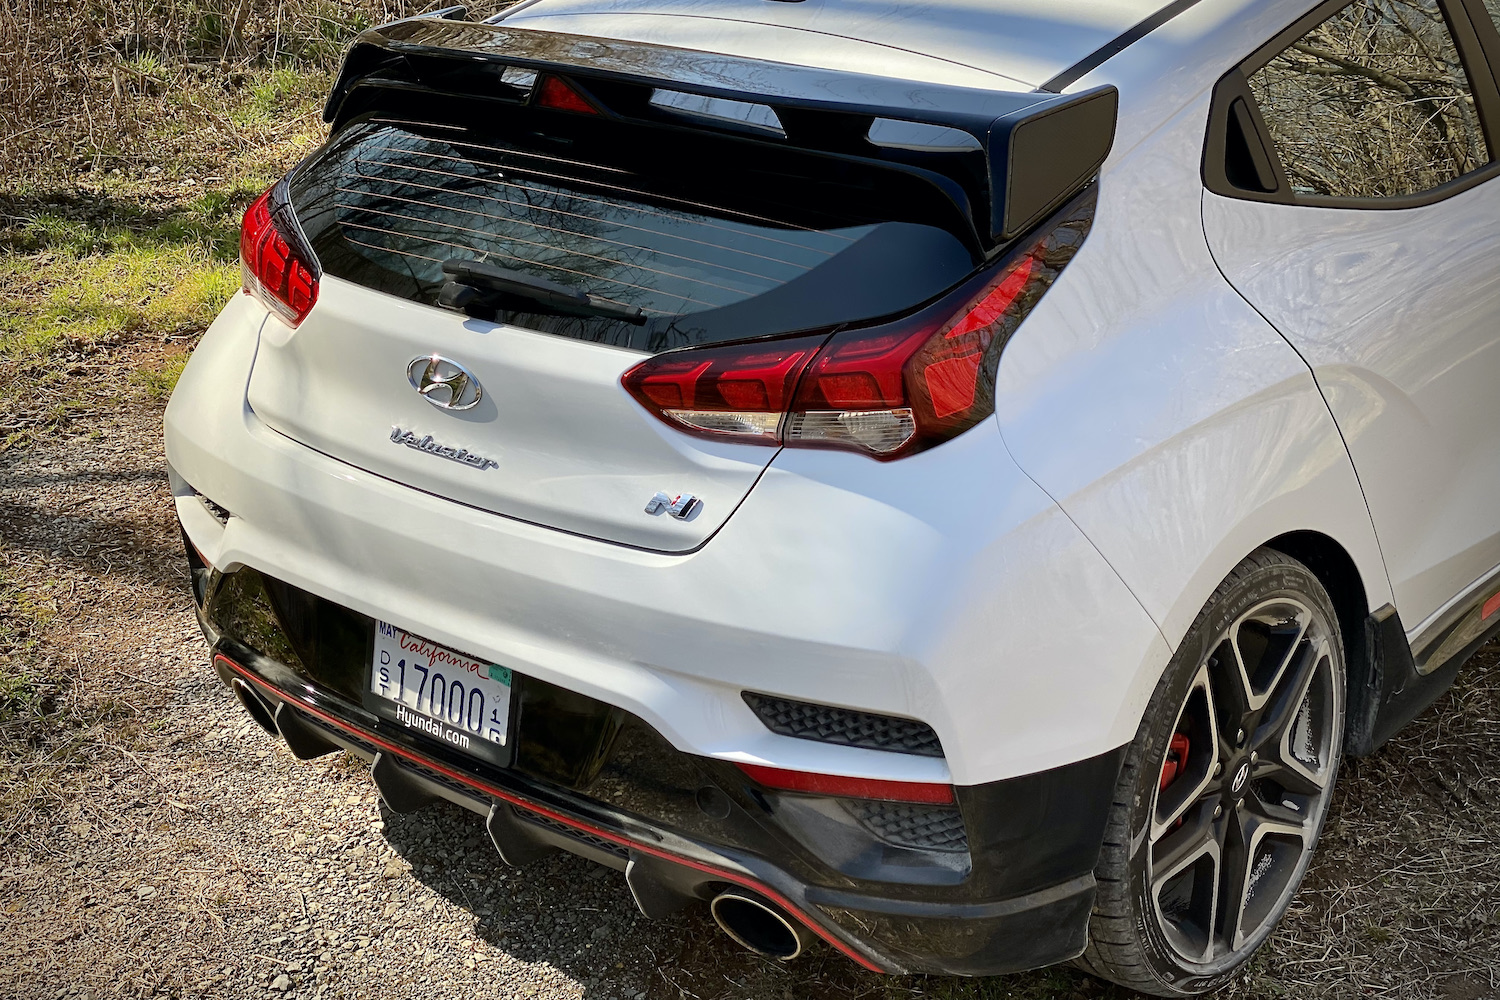 Hyundai Veloster N close up of rear end from passenger side on a dirt road.